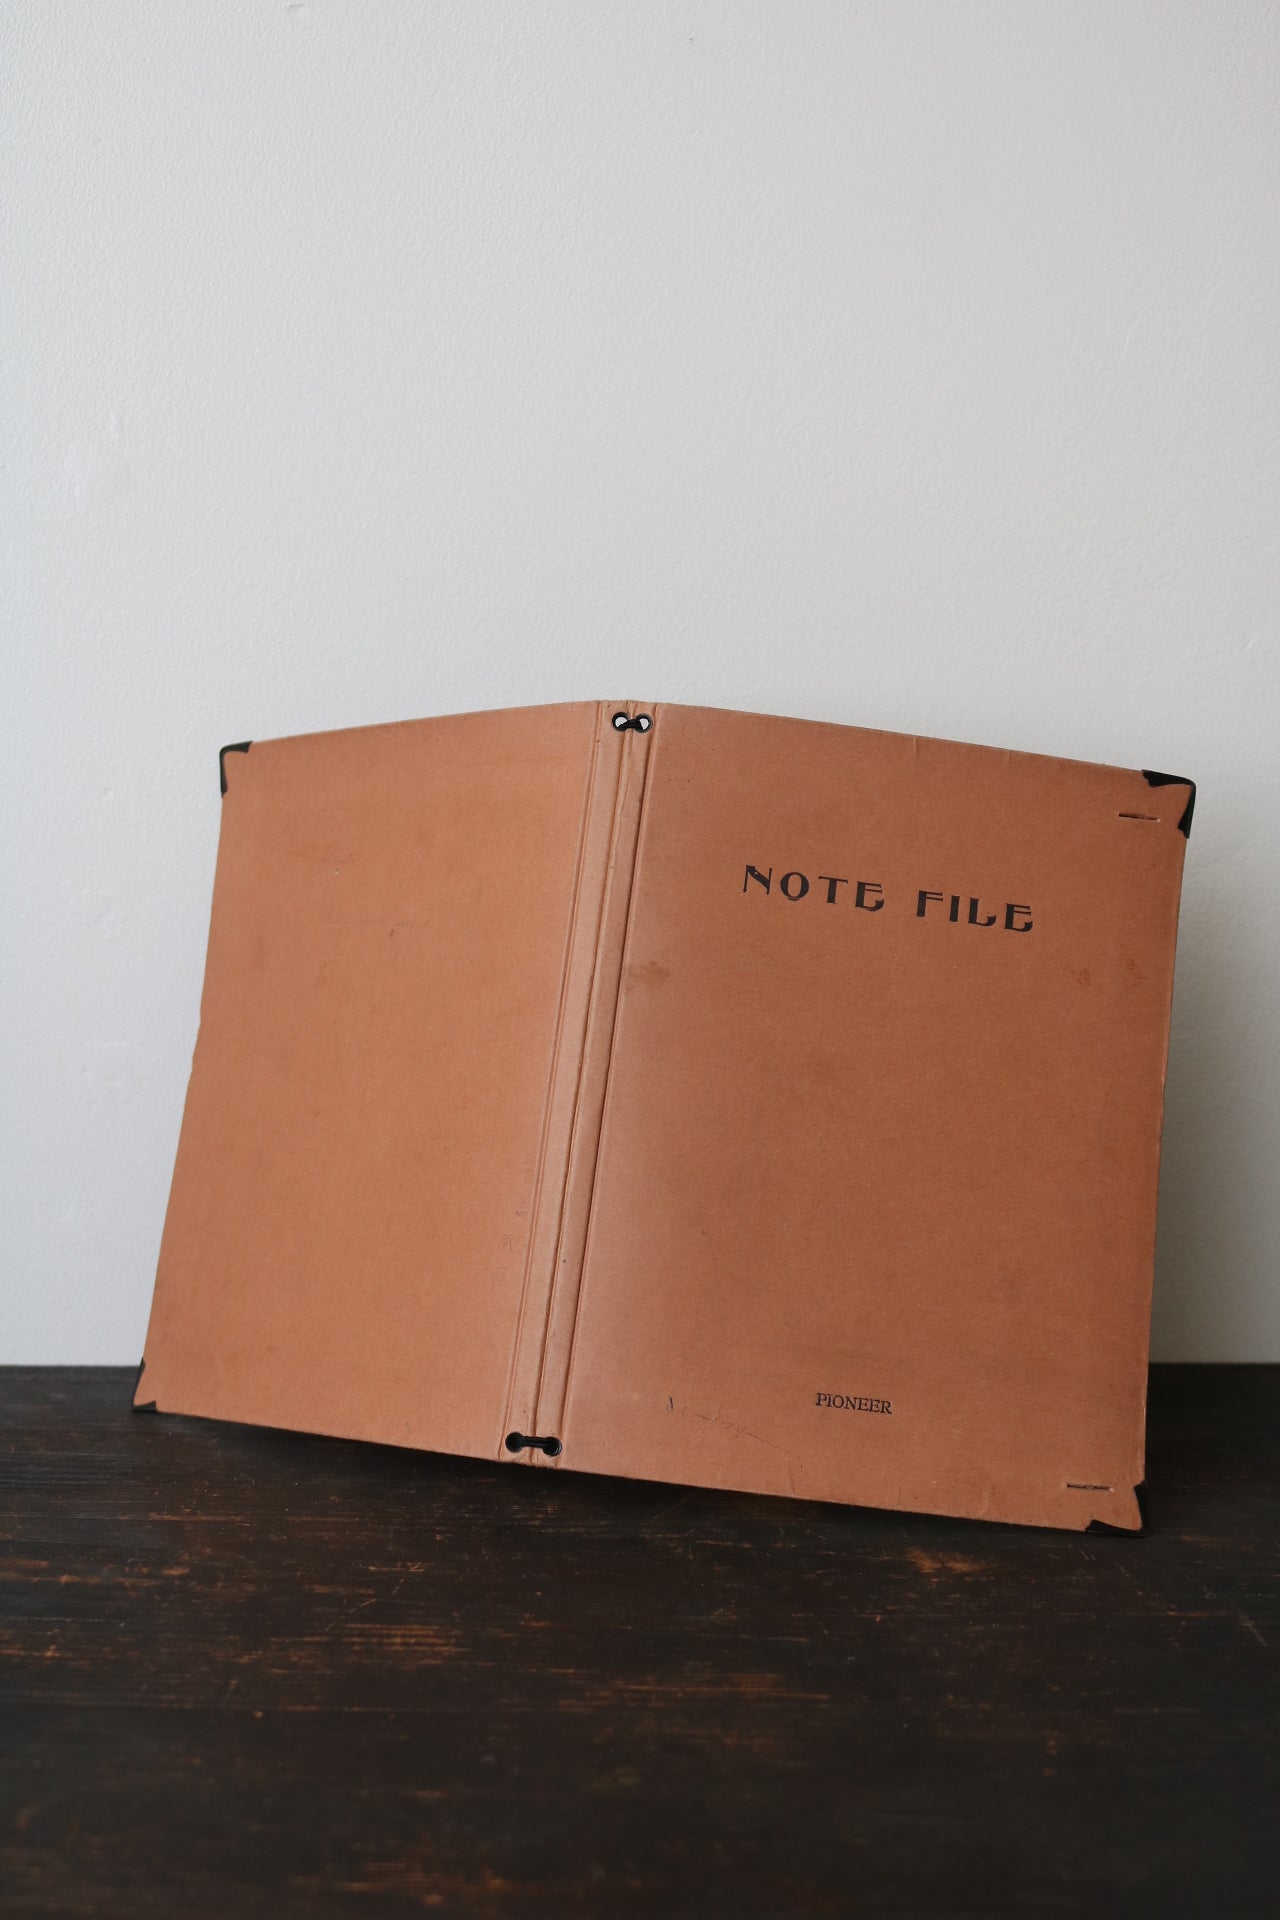 NOTE FILE